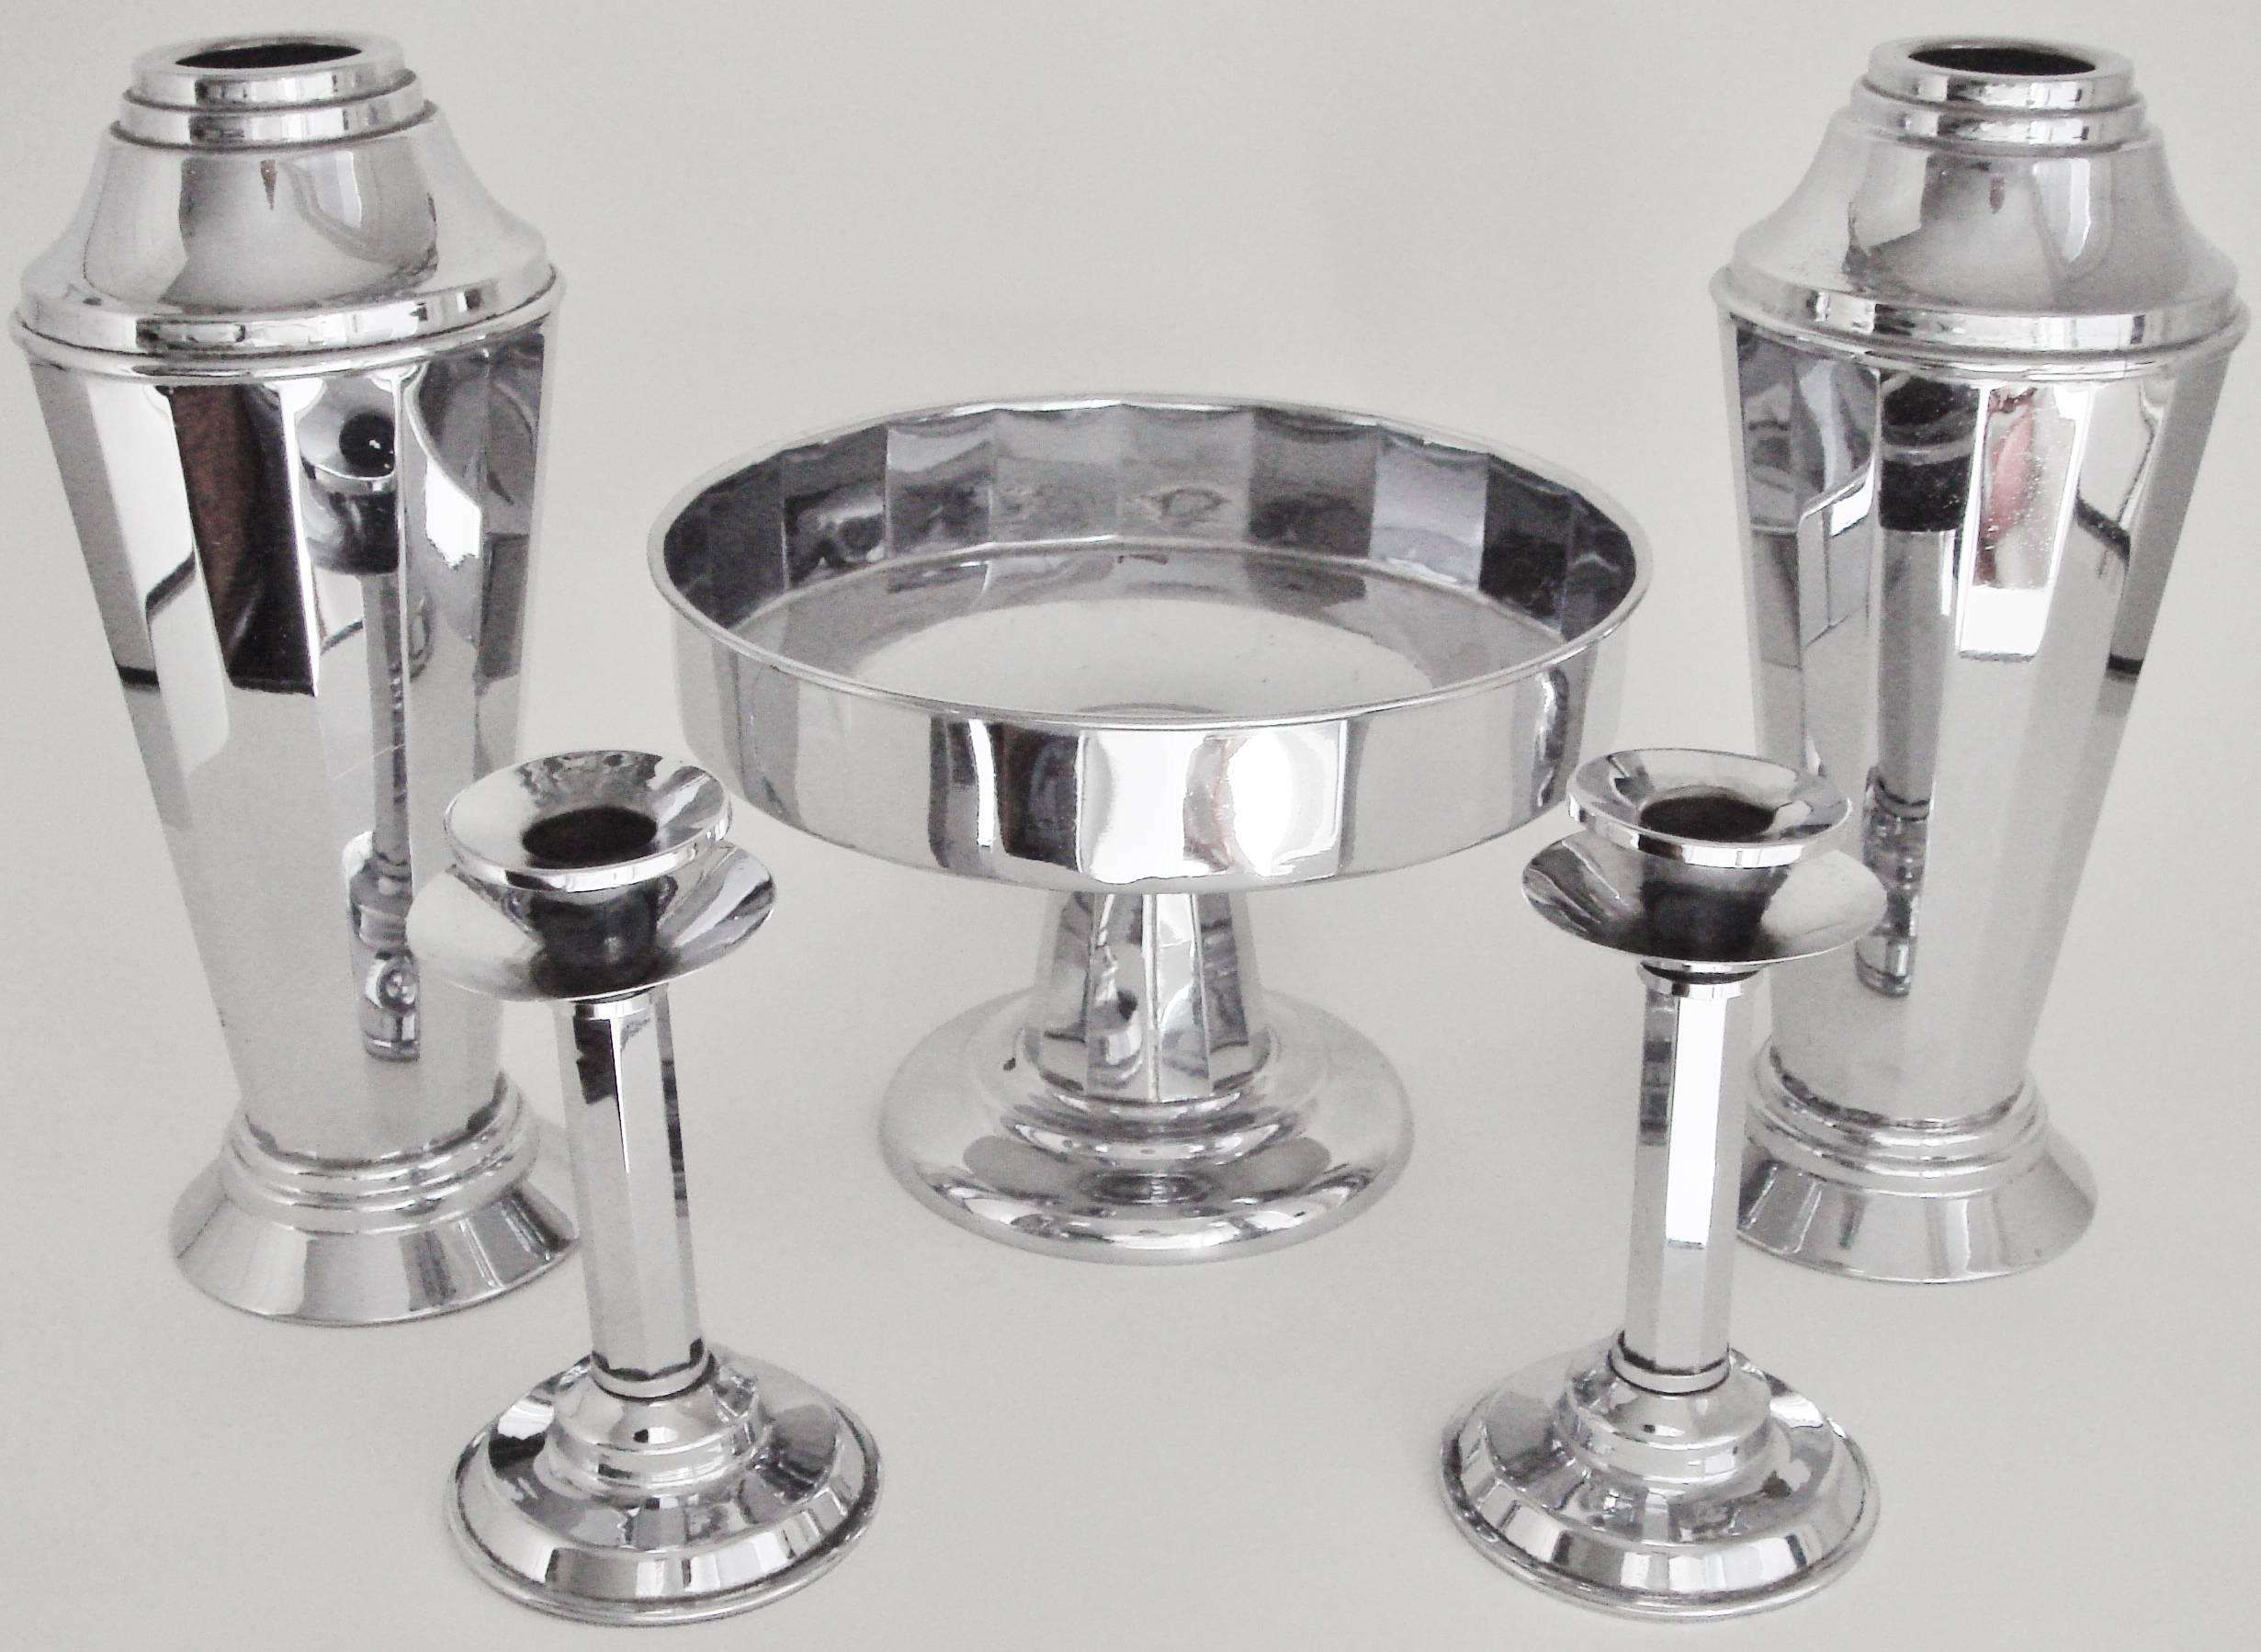 This 5-piece English cocktail shaker vases, candlesticks and pedestal fruit compote console set is by Beldray (Bradley and Company of Bilston, Staffordshire) who began producing metal ware in the Arts and Crafts style in 1903. The company had a